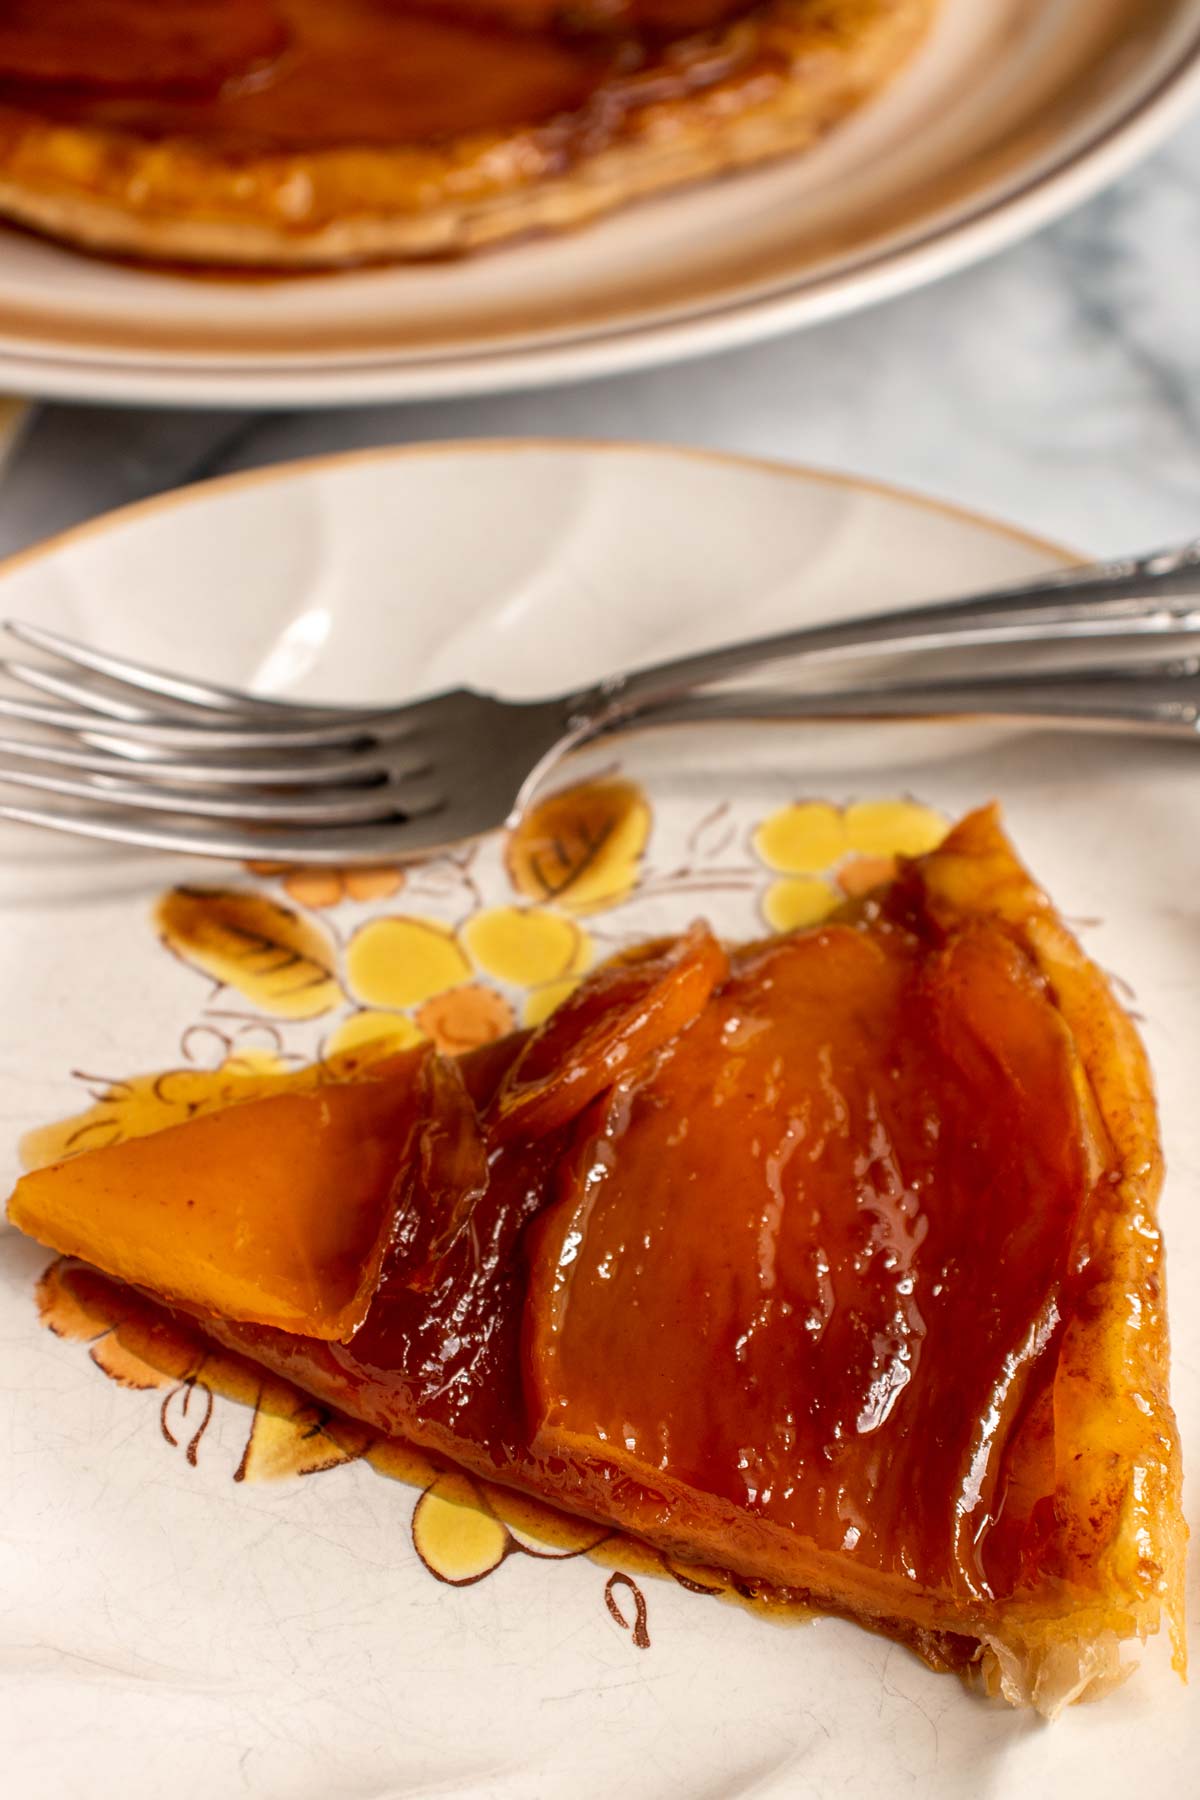 Closeup of a slice of mango tarte tatin on a rustic plate with two forks.